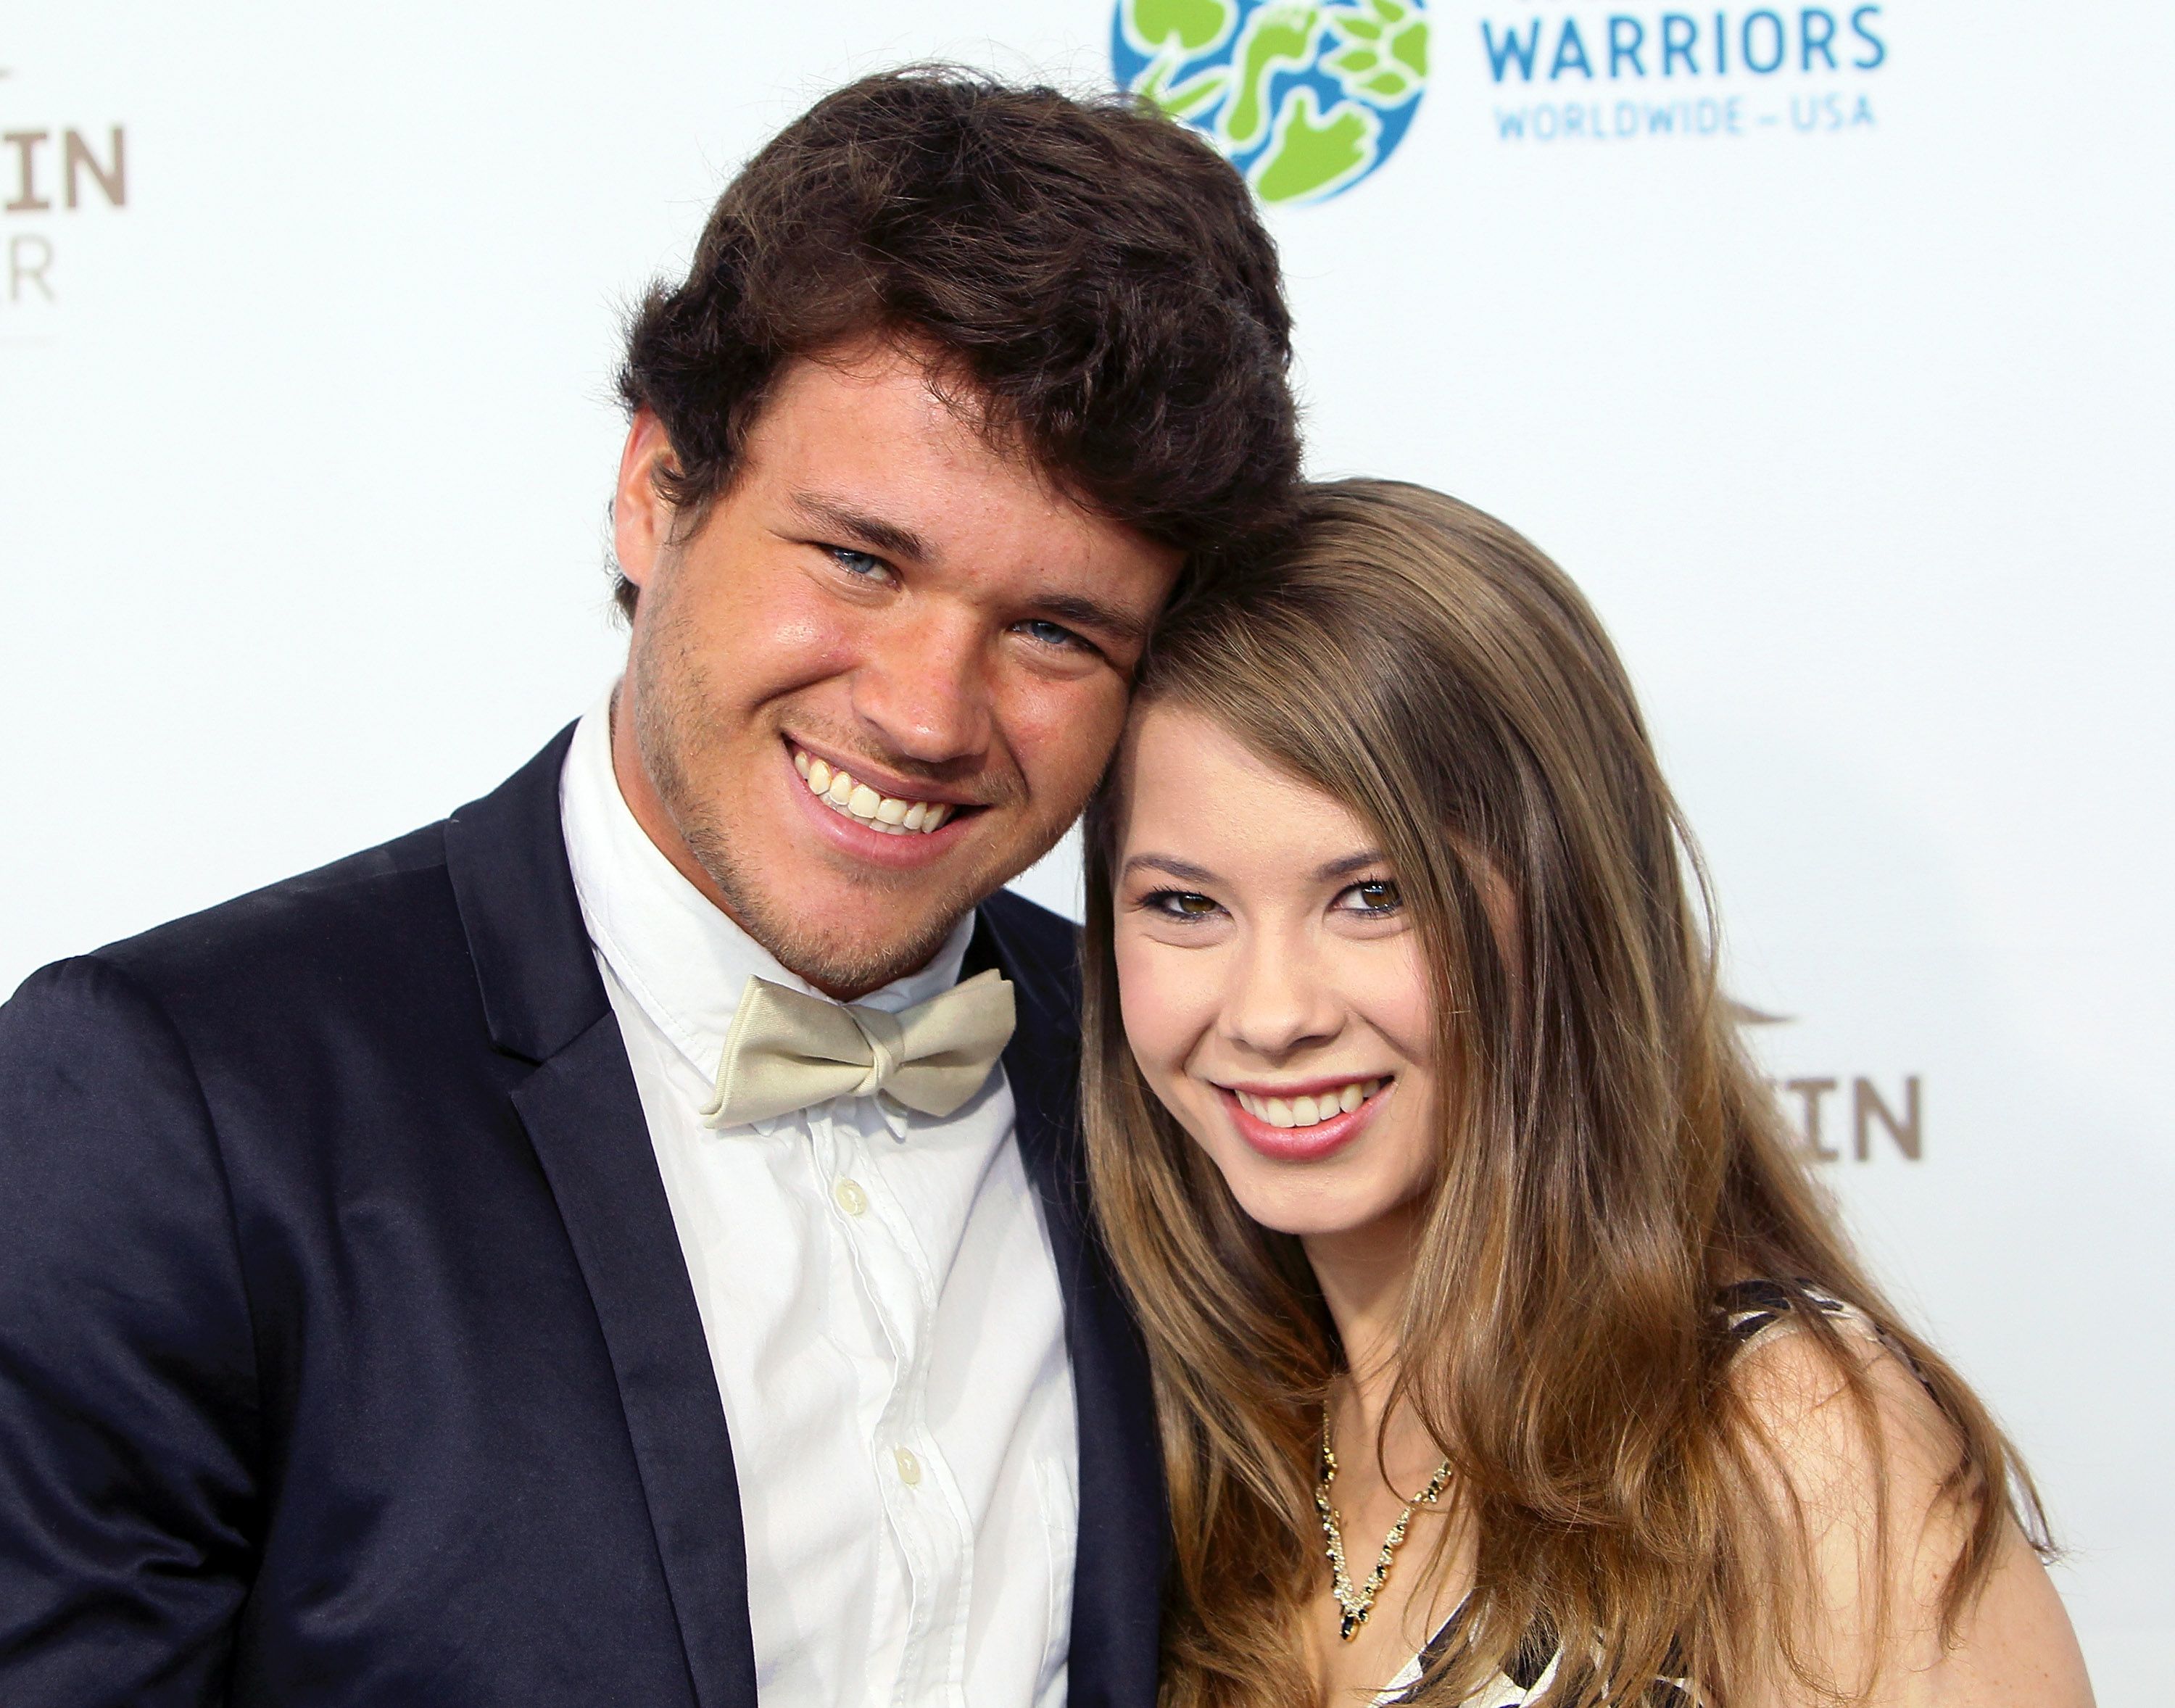 Wakeboarder Chandler Powell and Bindi Irwin at the Steve Irwin Gala Dinner on May 21, 2016 | Photo: Getty Images